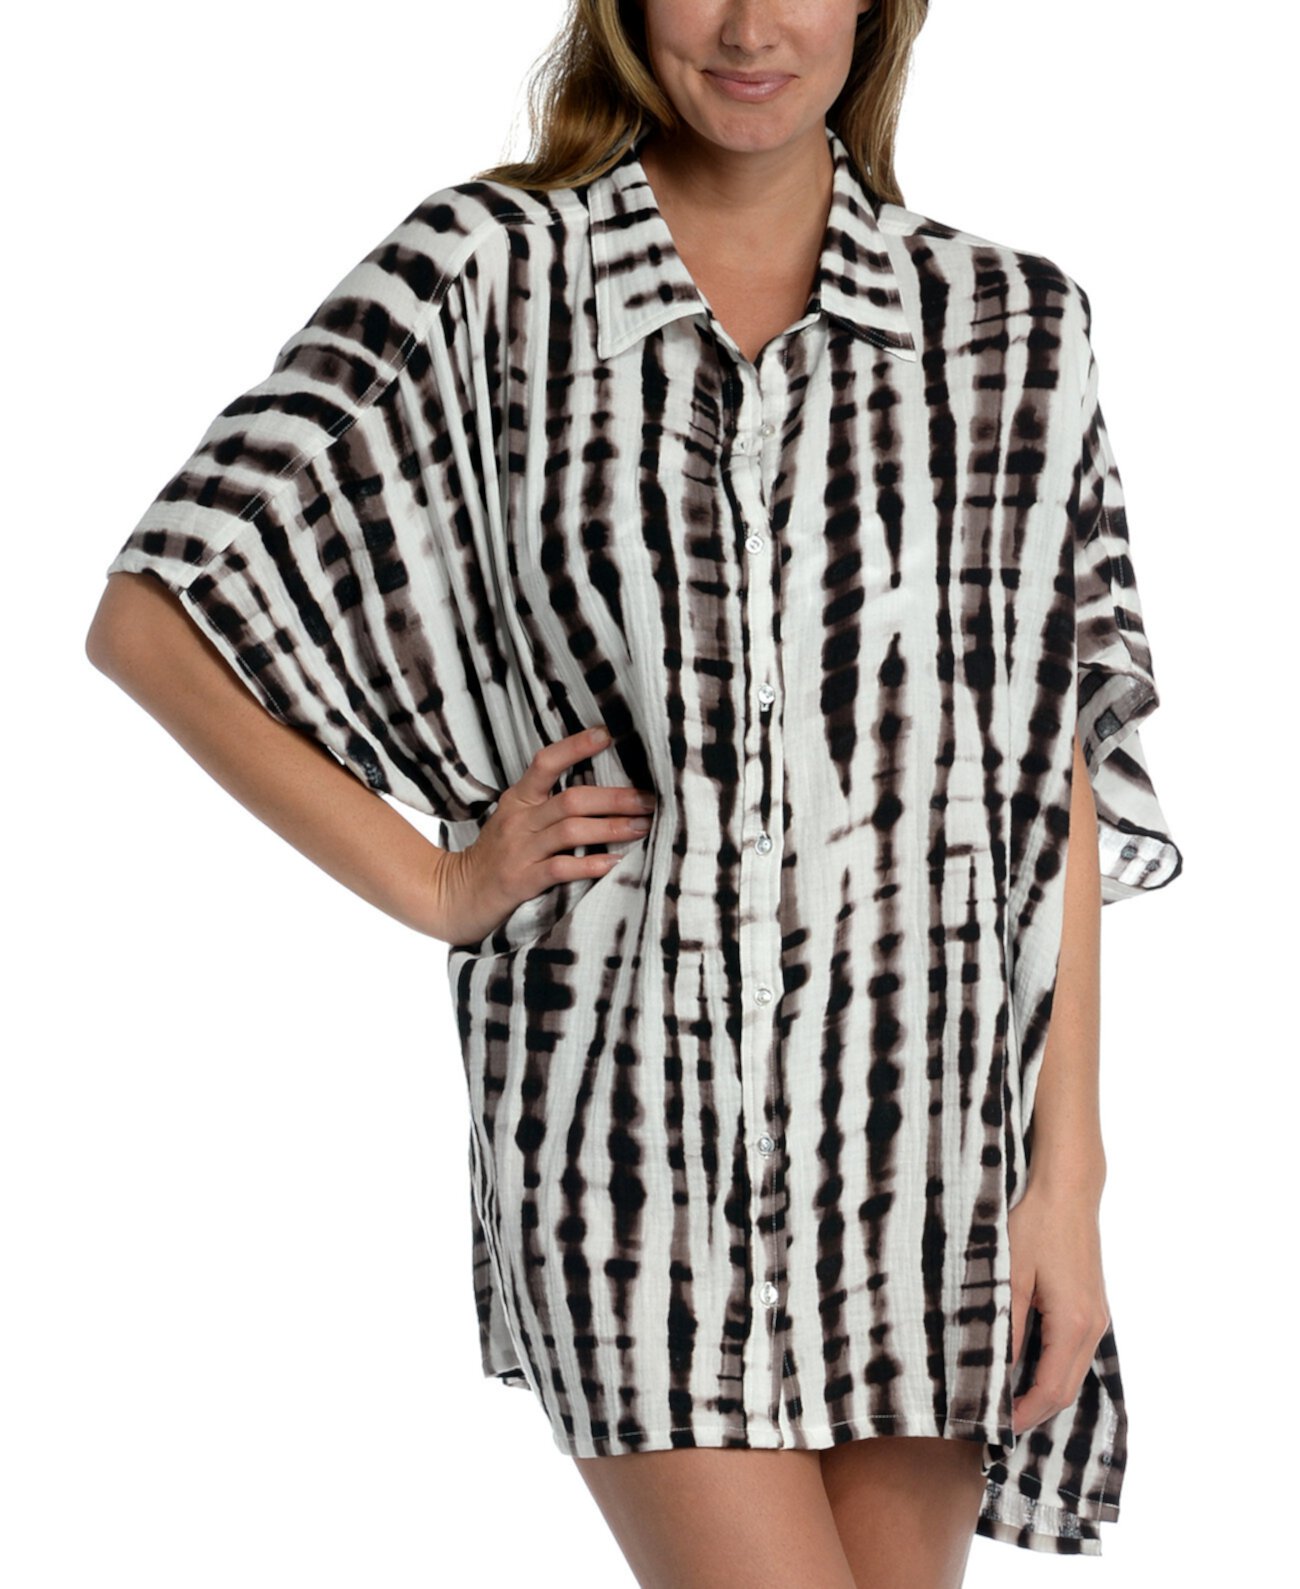 Women's Twisted Bamboo Convertible Shirtdress Cover-Up La Blanca